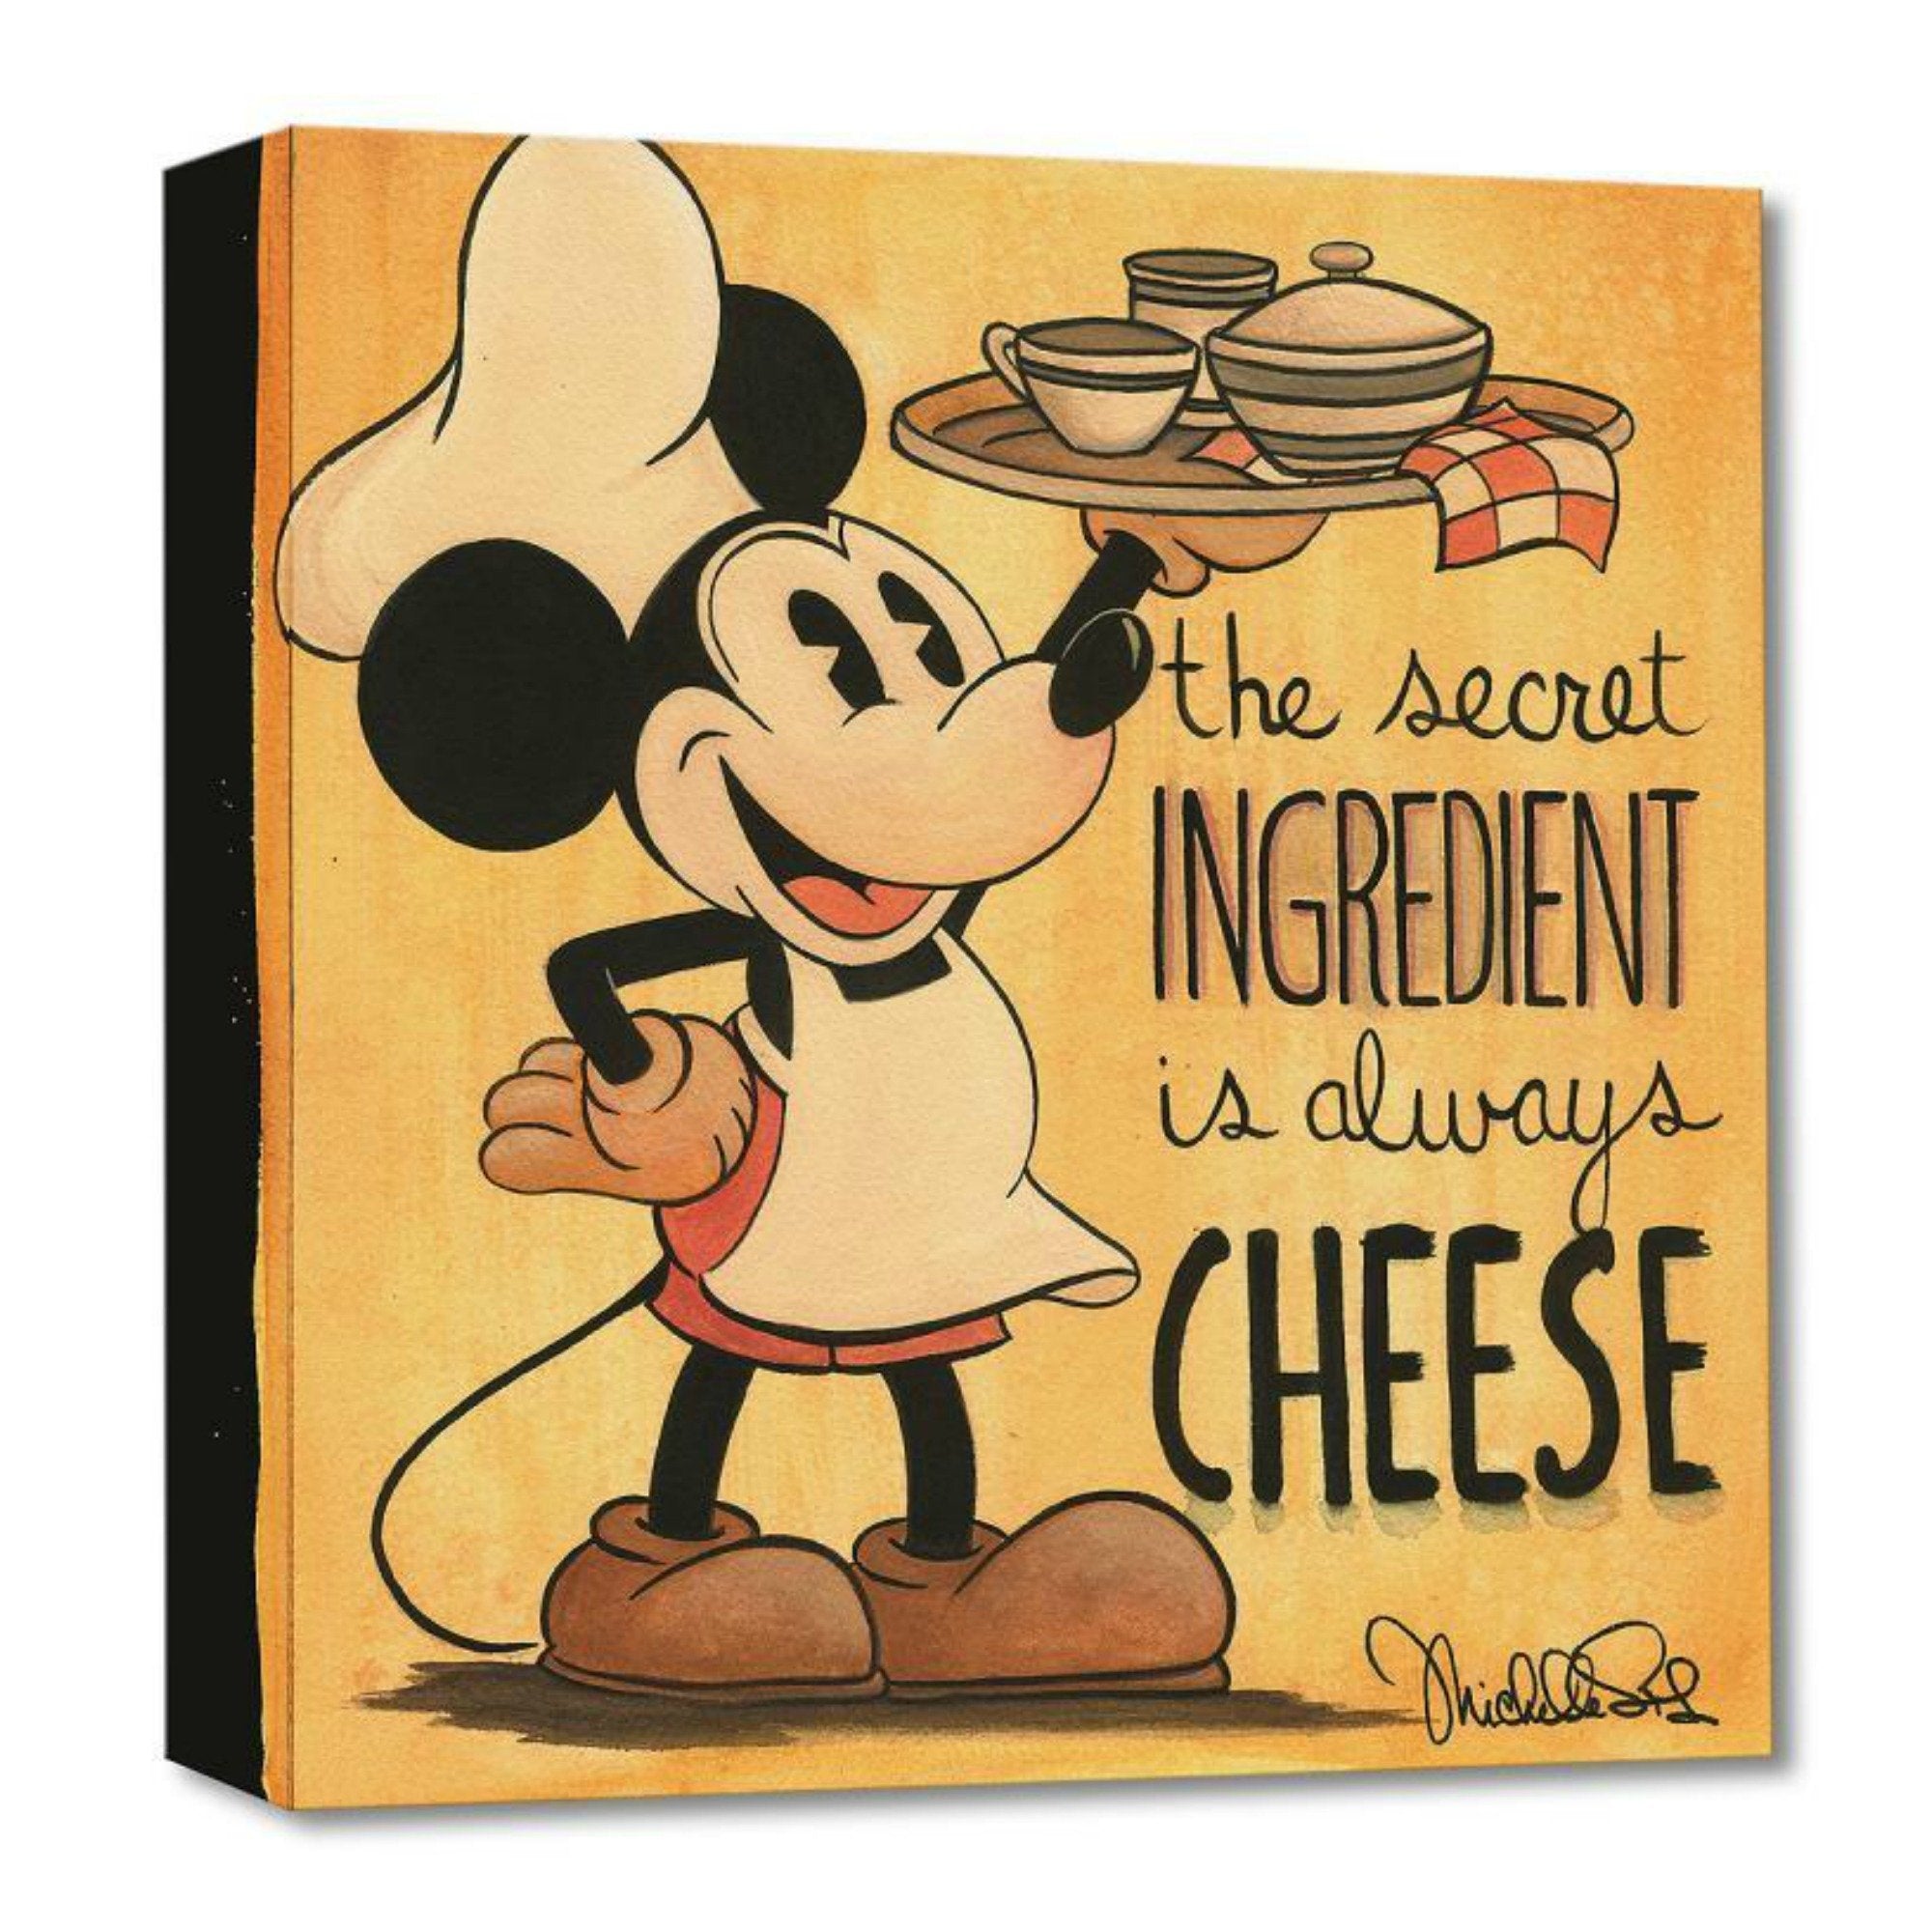 The Secret Ingredien tby Michelle St. Laurent.  Mickey the chef carrys the serving tray with the secret meal, in this vintage style sepia tone colors print.